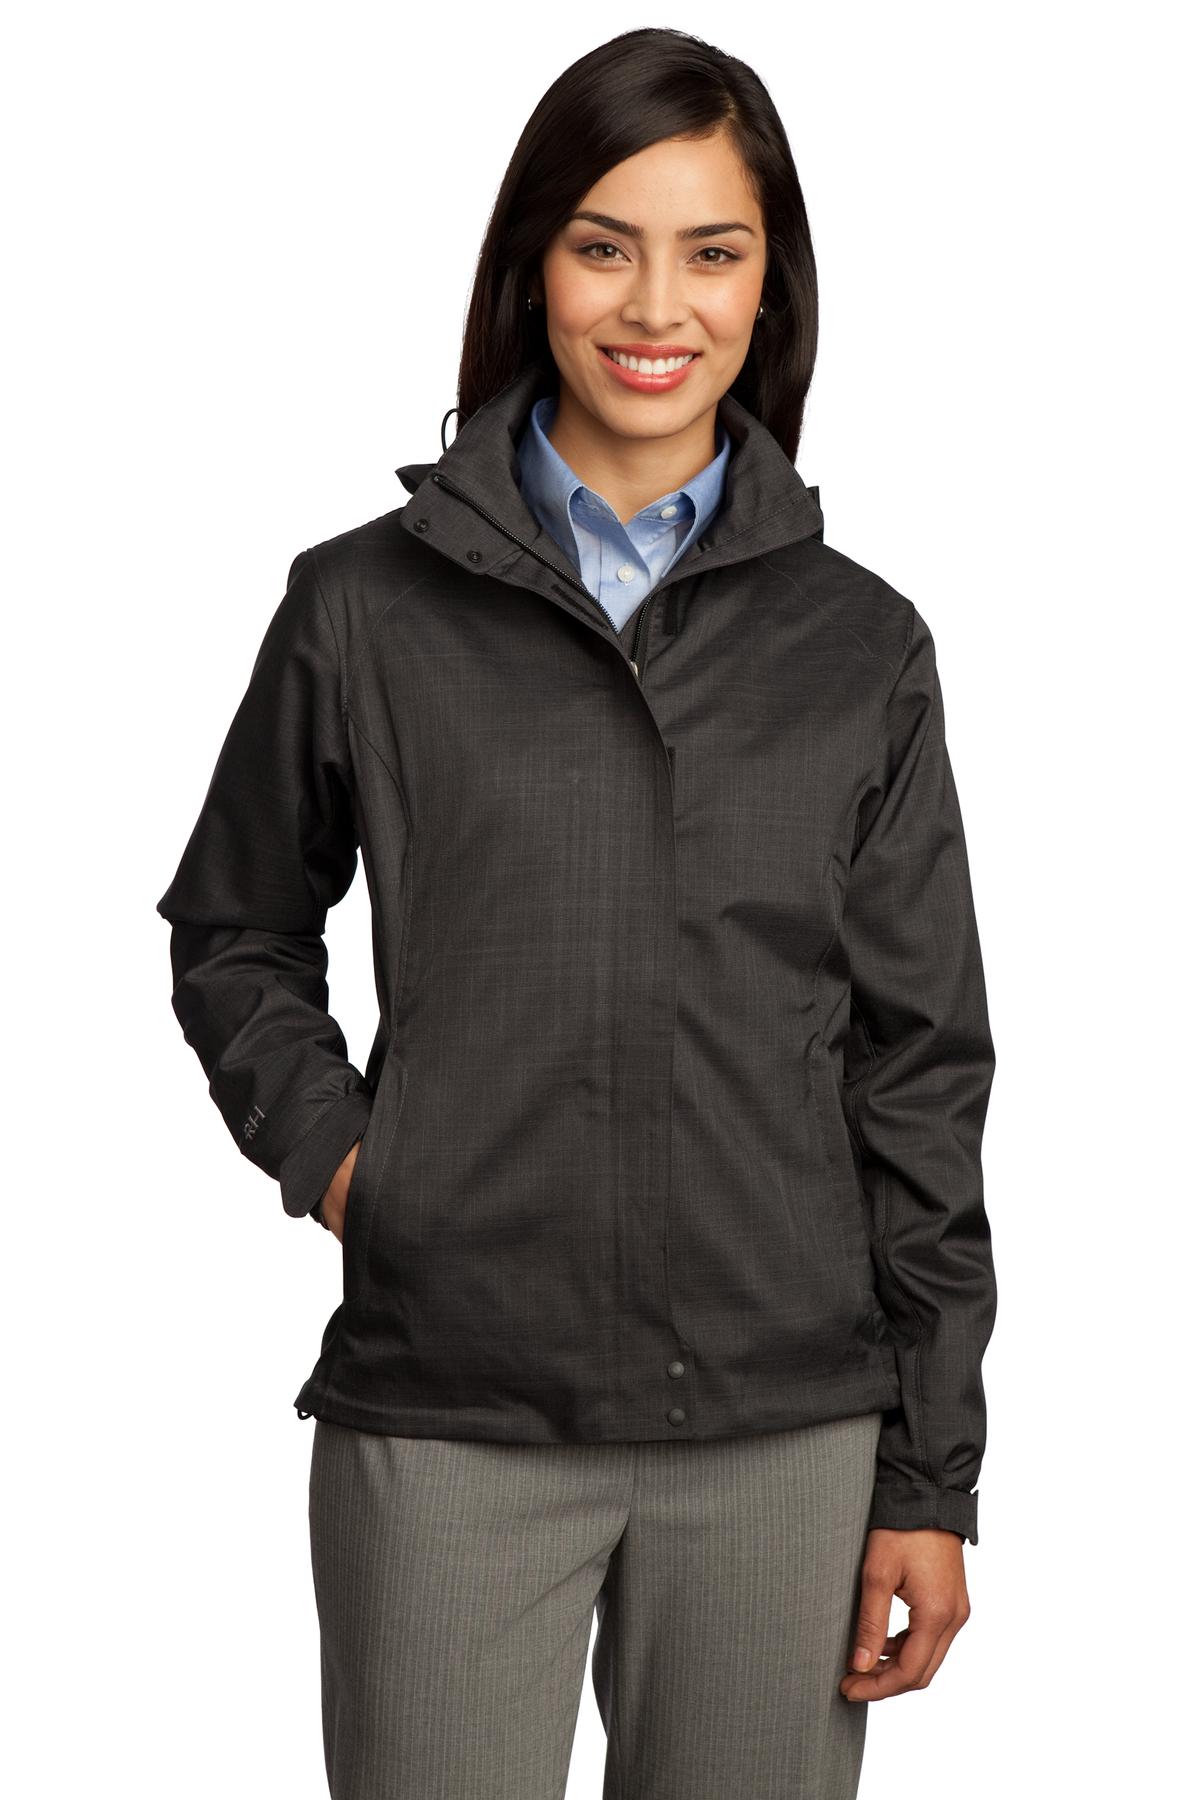 CLOSEOUT Red House  RH43 - Ladies Crosshatch Jacket